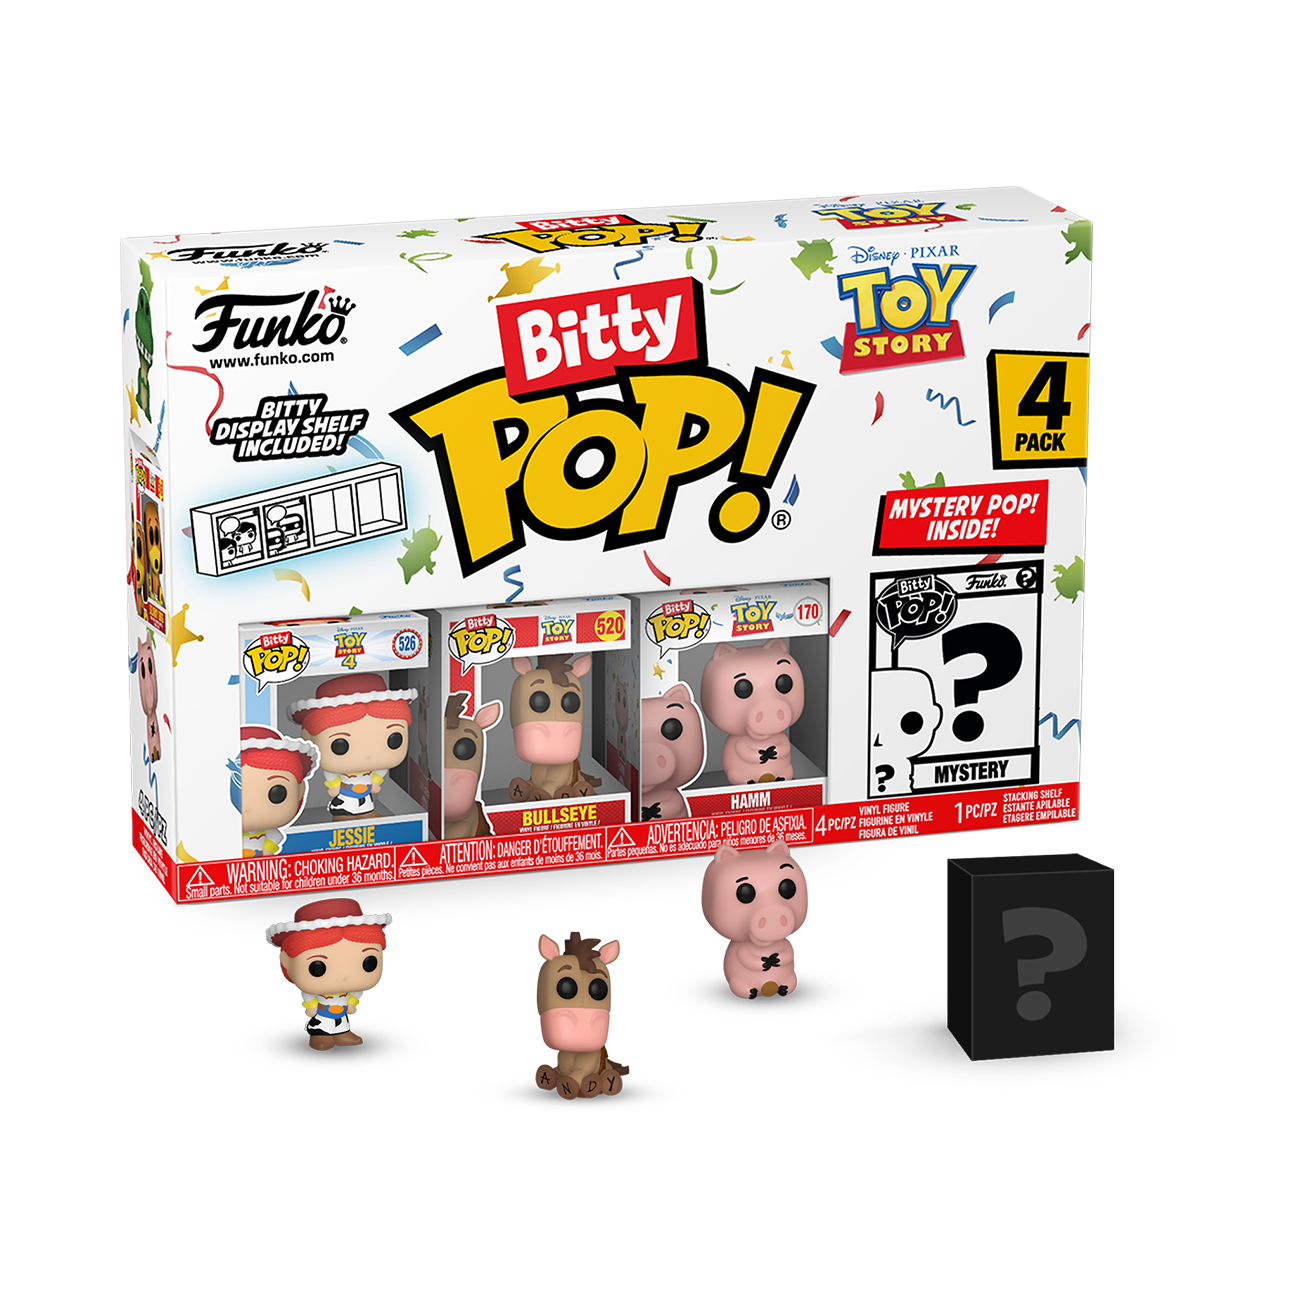 Funko BITTY POP! Toy Story 4-Pack Series 2